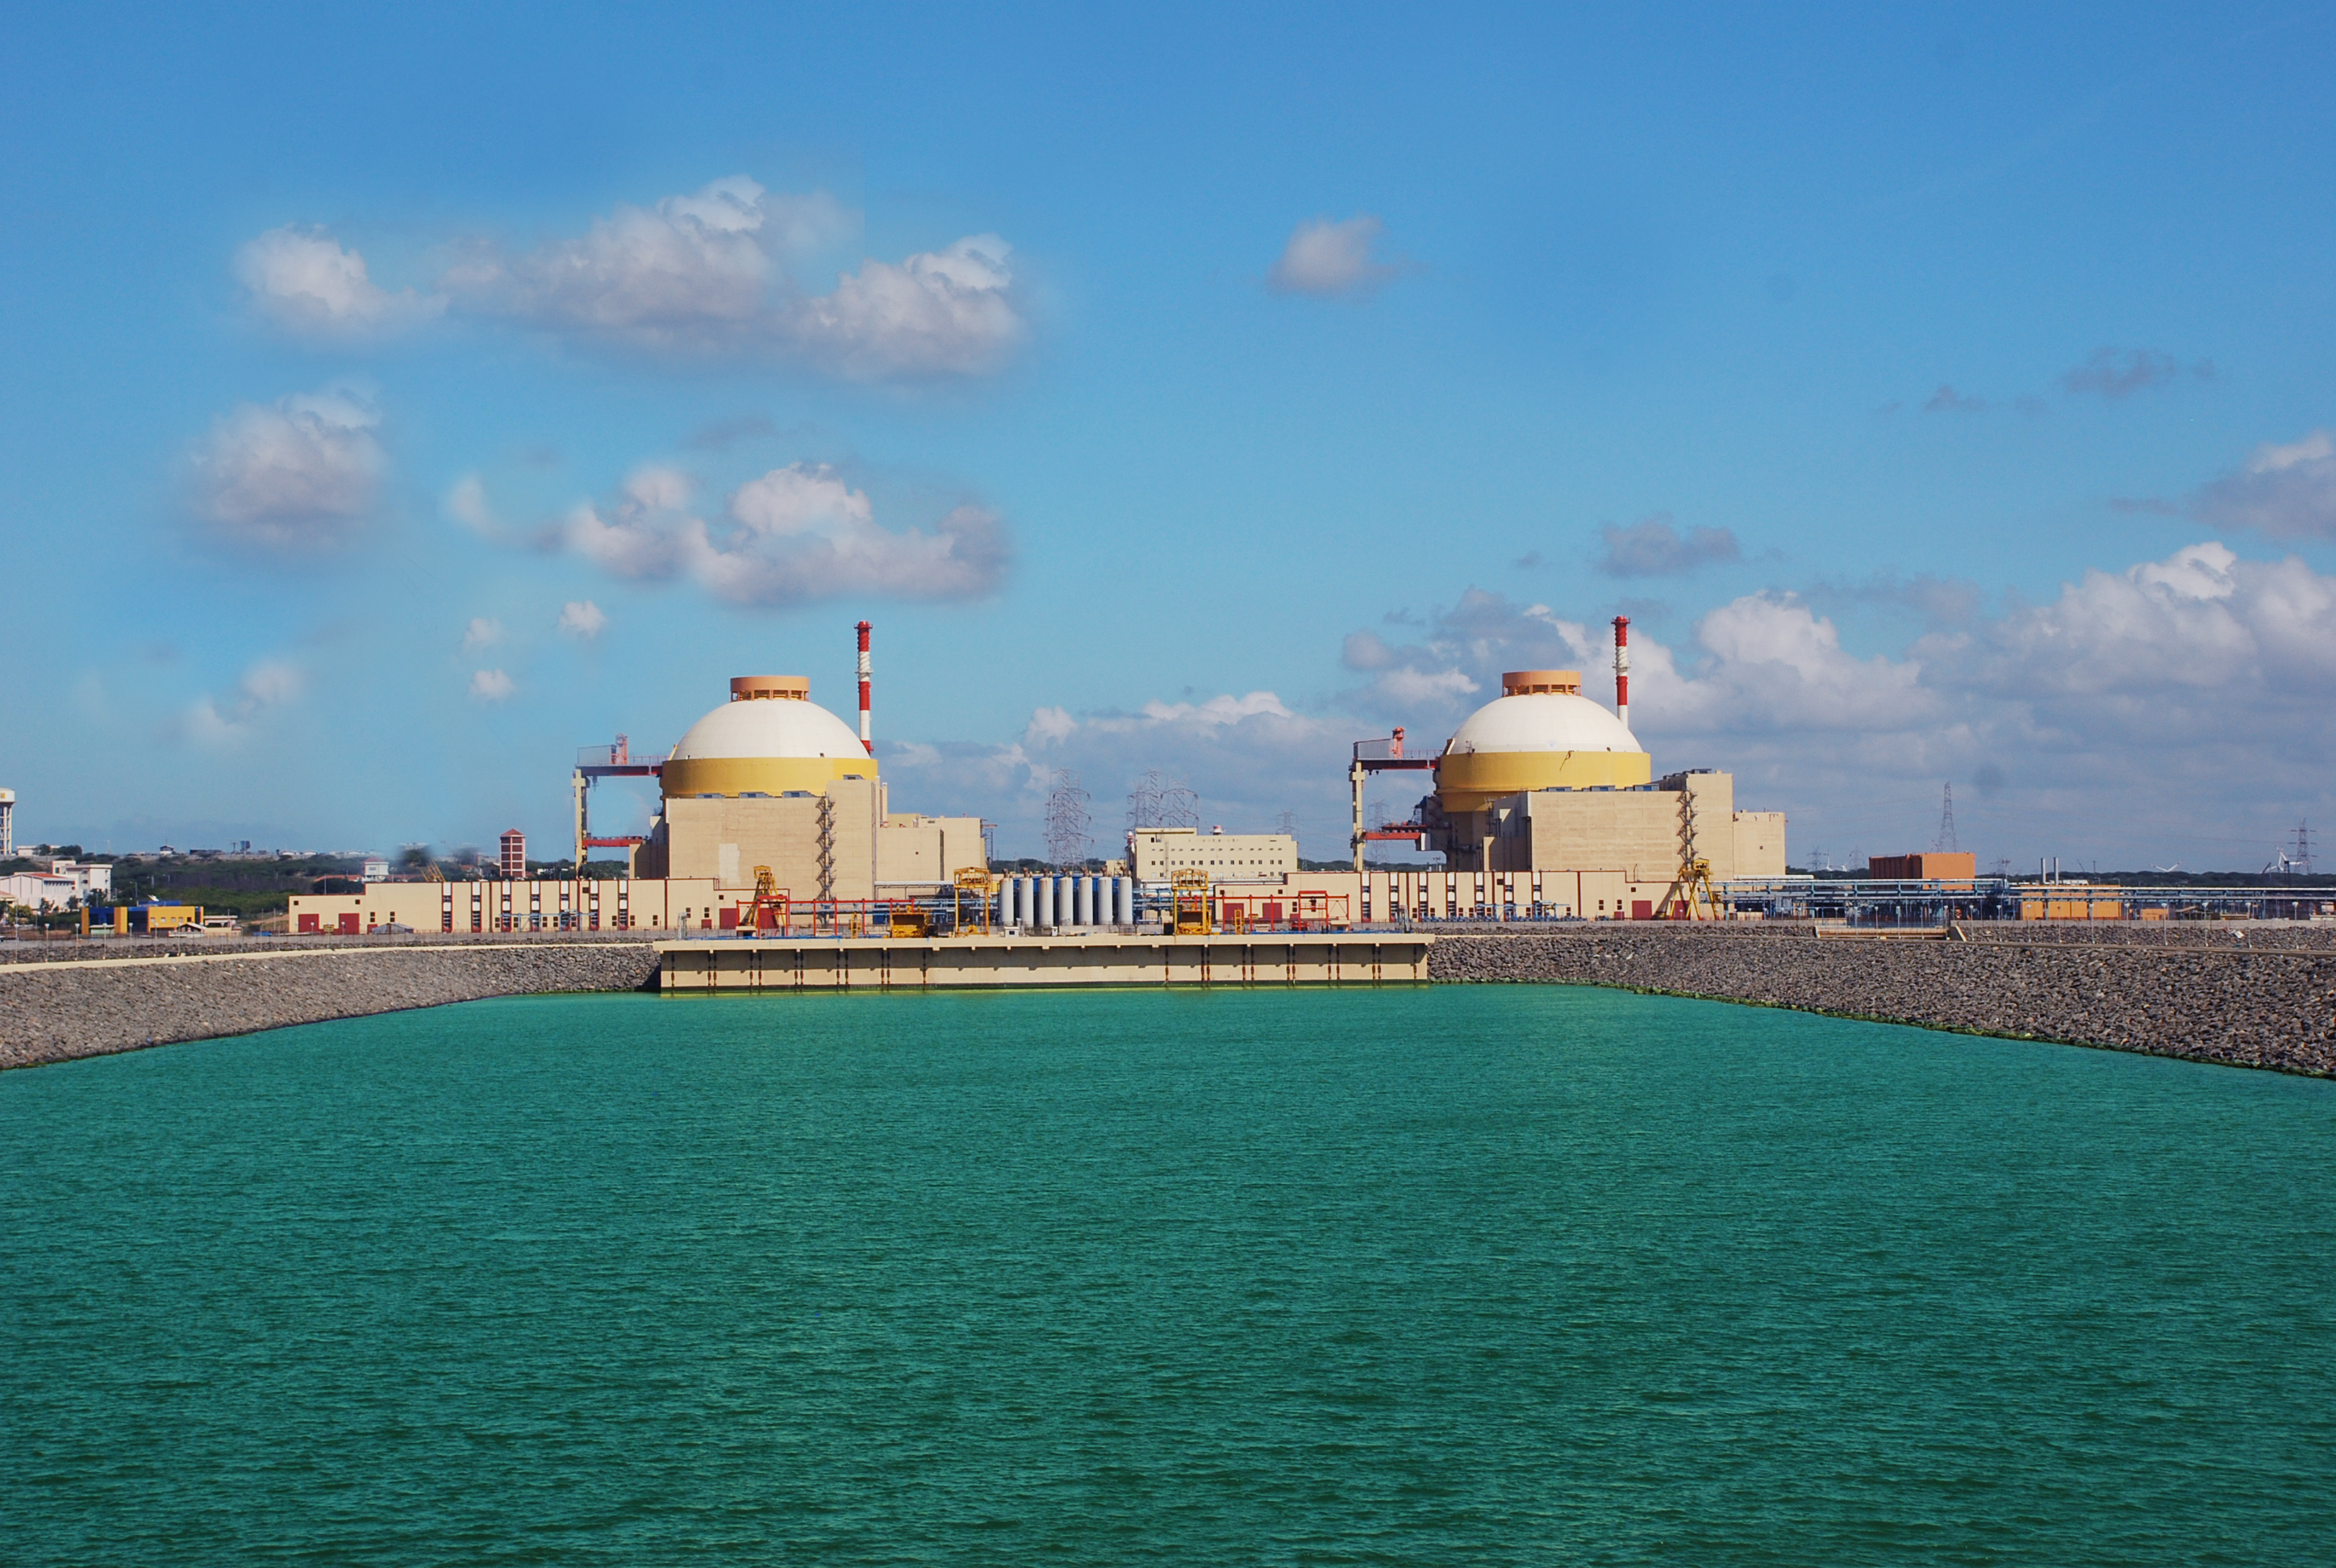 ASE Group of Companies and Nuclear Power Corporation of India Ltd. signed an agreement on the third stage of Kudankulam NPP construction